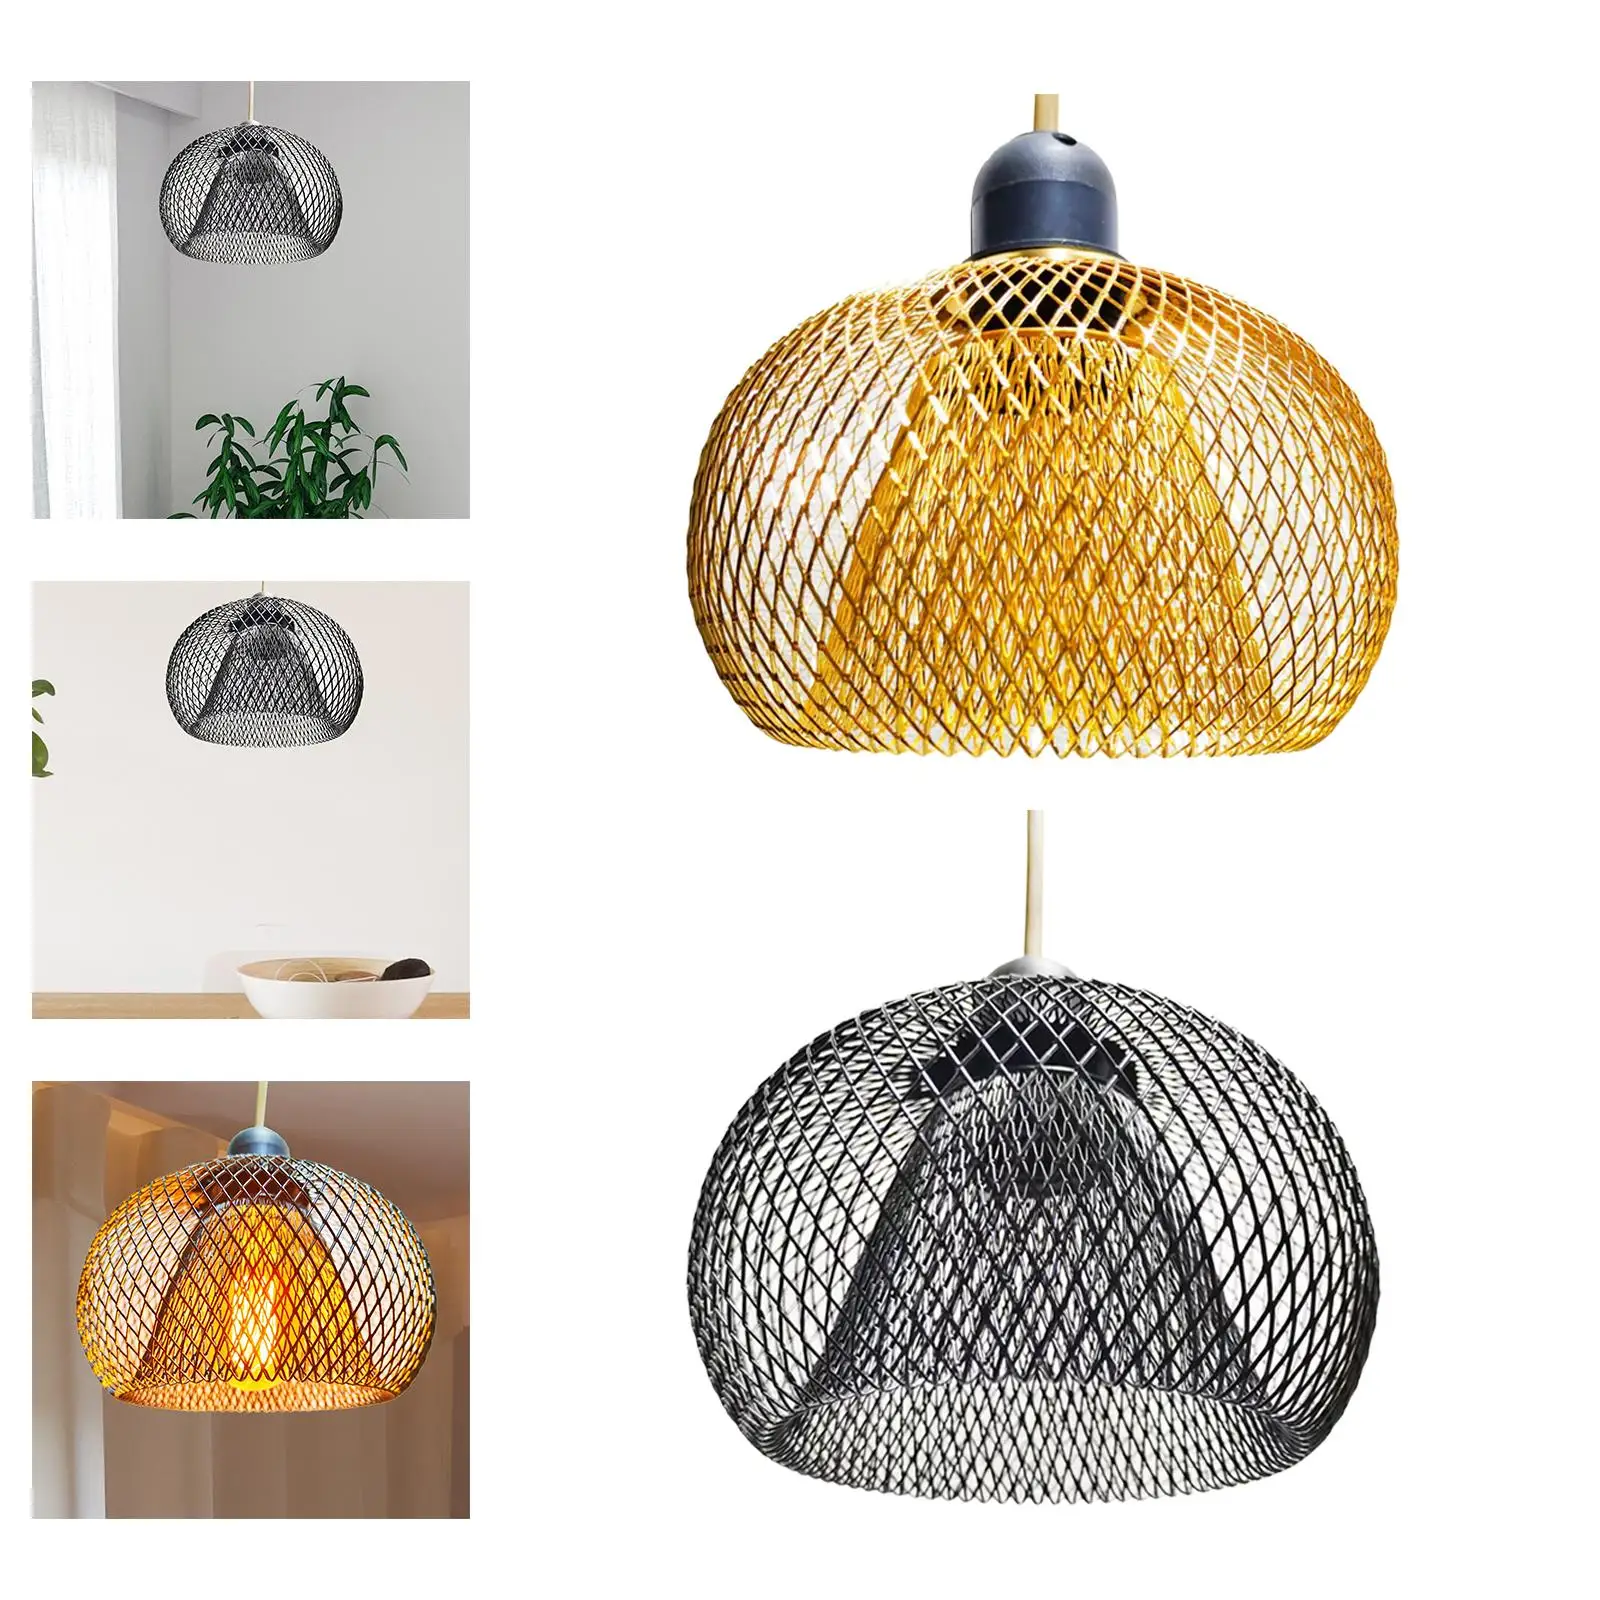 Metal Wire Pendant Lamp Shade Hollow Out Ceiling Light Cover Hanging Light Cover for Cafe Kitchen Island Dining Room Home Decor